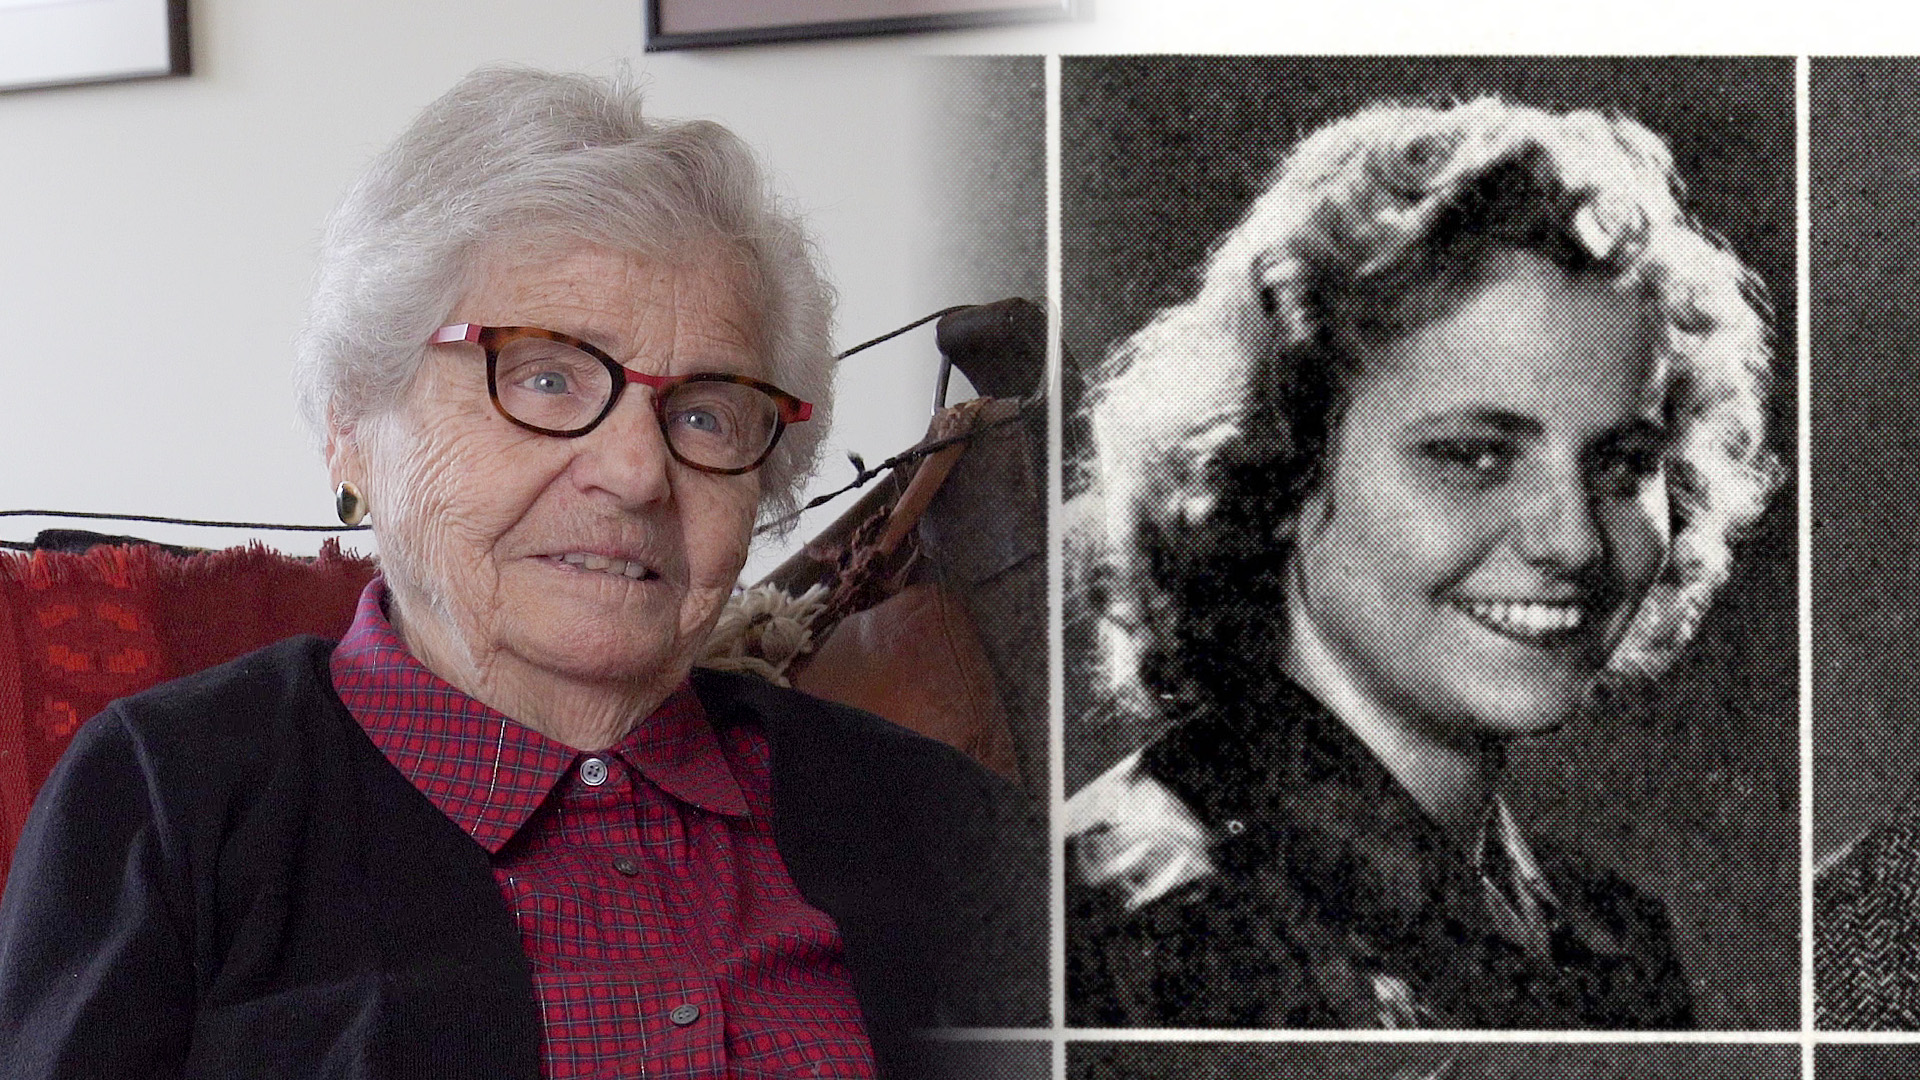 A portrait of Hedi Pope at 99 years old appears on the left side of the image, which fades into a close-up of her 1942 yearbook portrait in the Miami University Recensio.